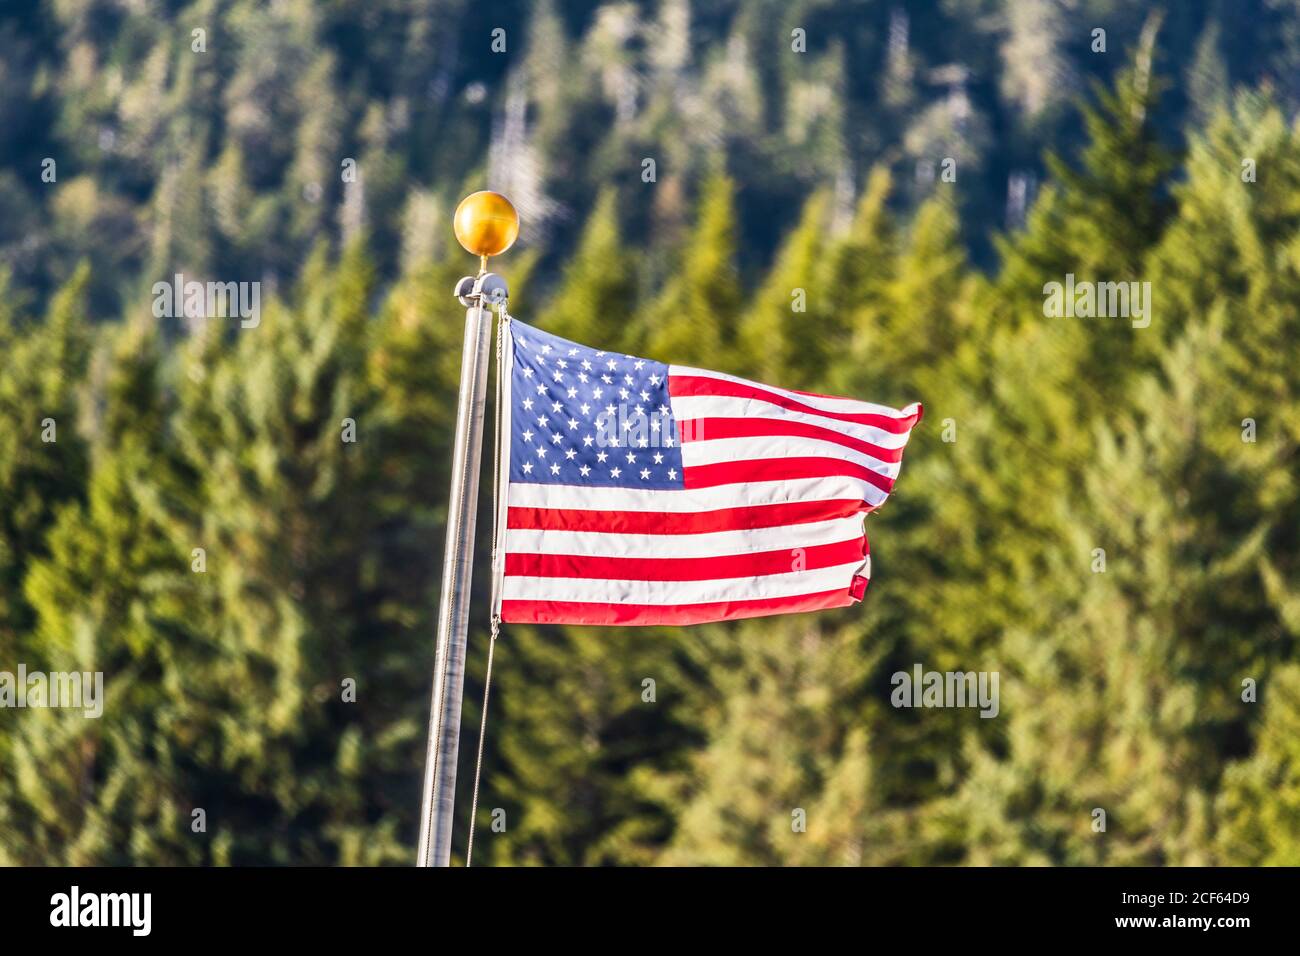 USA flag waving on forest outdoor background. American symbol. Stock Photo